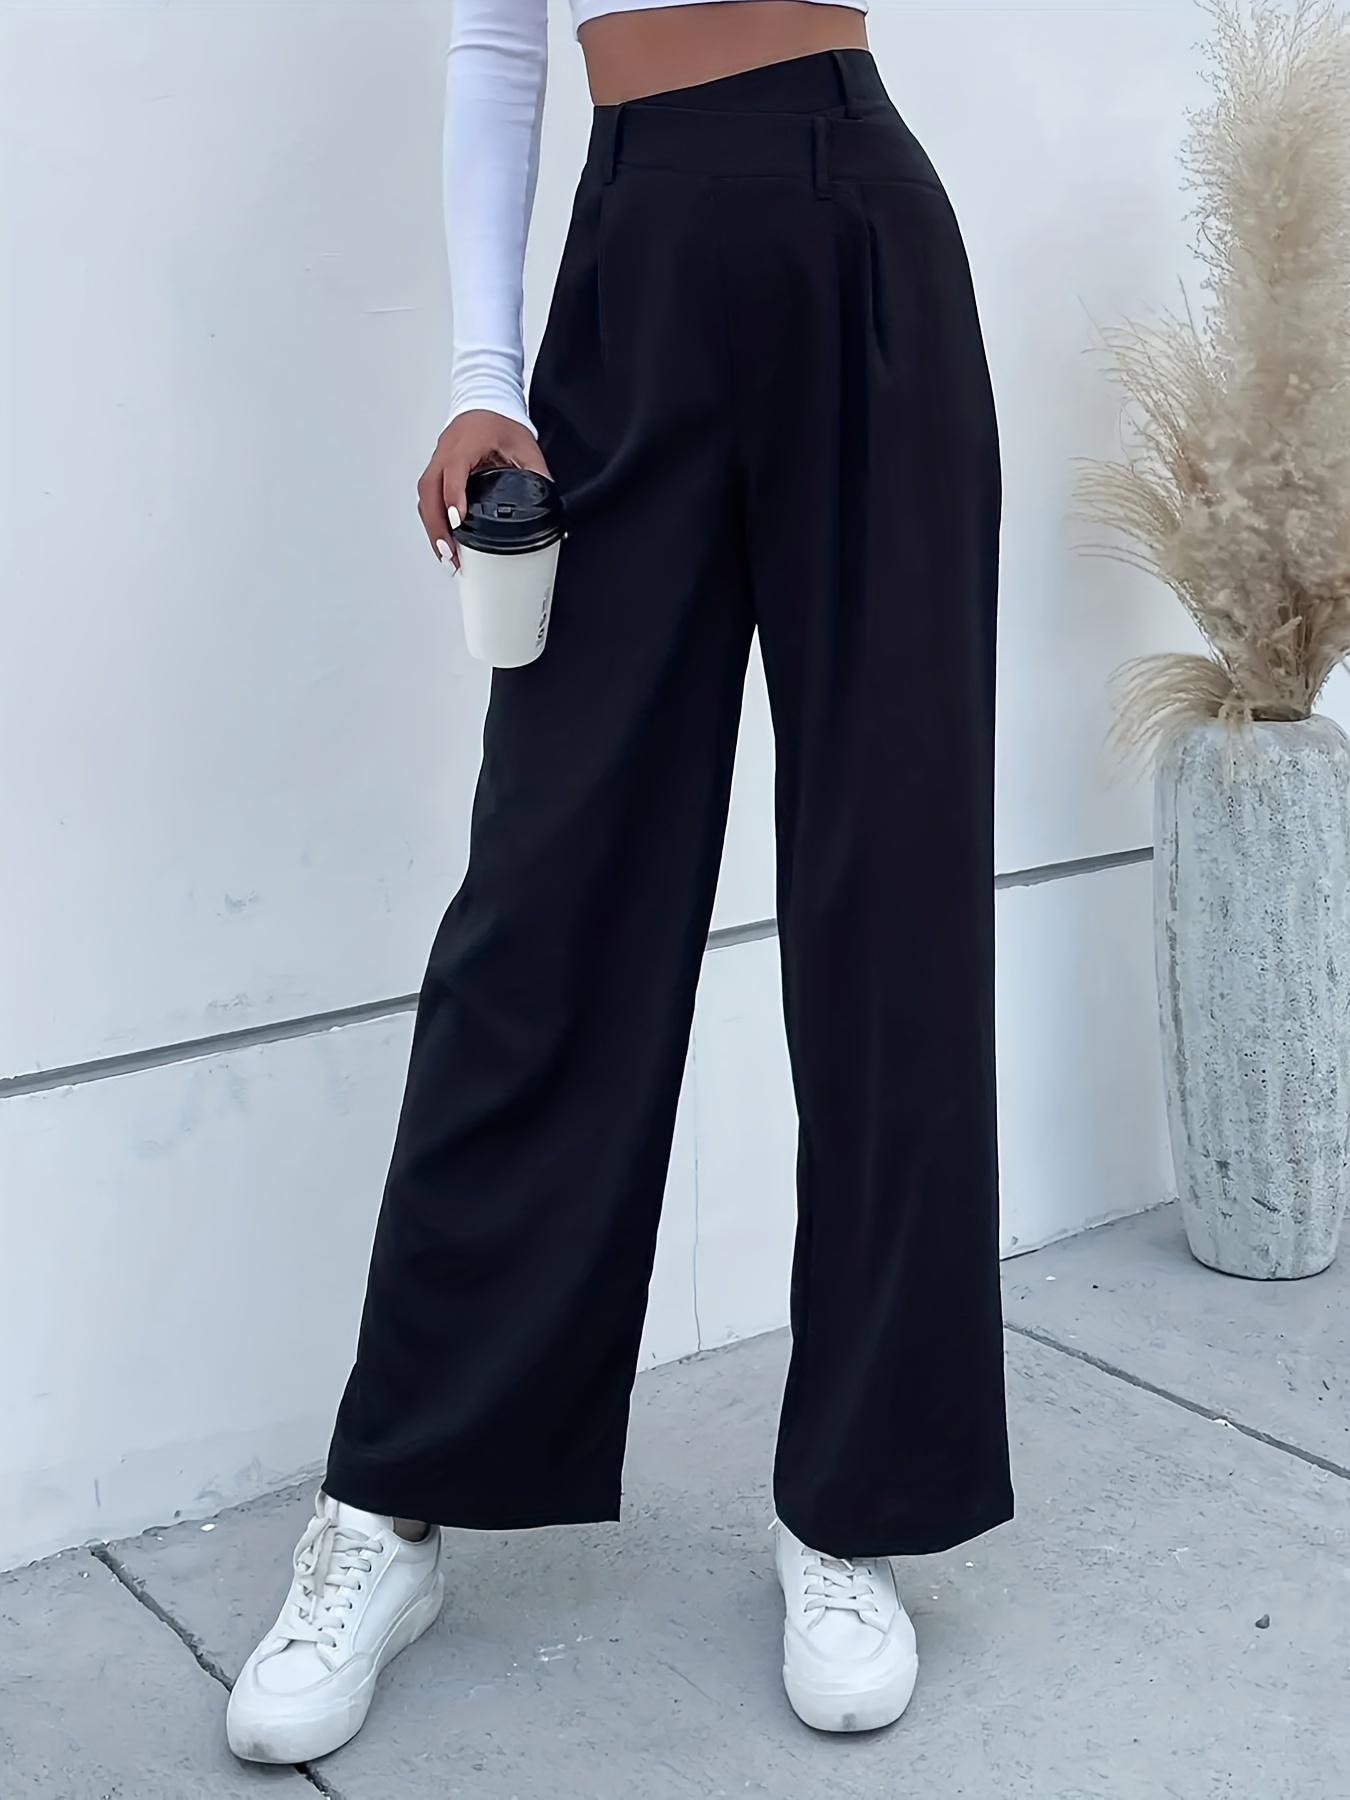 Viatabuna High Waisted Pleated Pants for Women Work Office Solid Casual Pants  Straight Leg Dress Pants at  Women's Clothing store